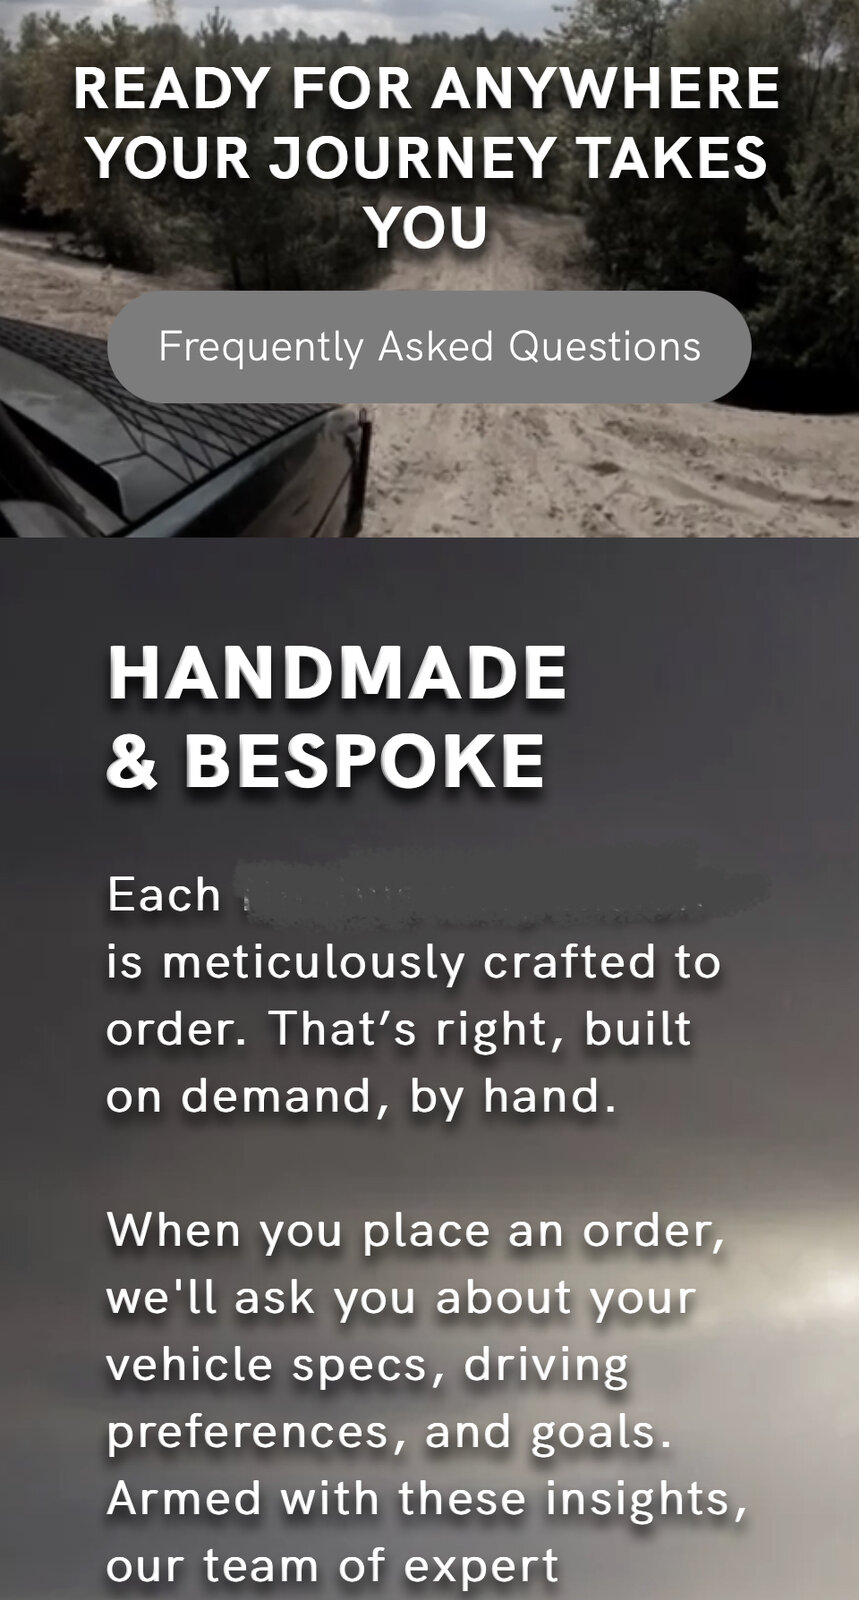 Today's hipster buzzword: "bespoke"🧚🏻‍♂️